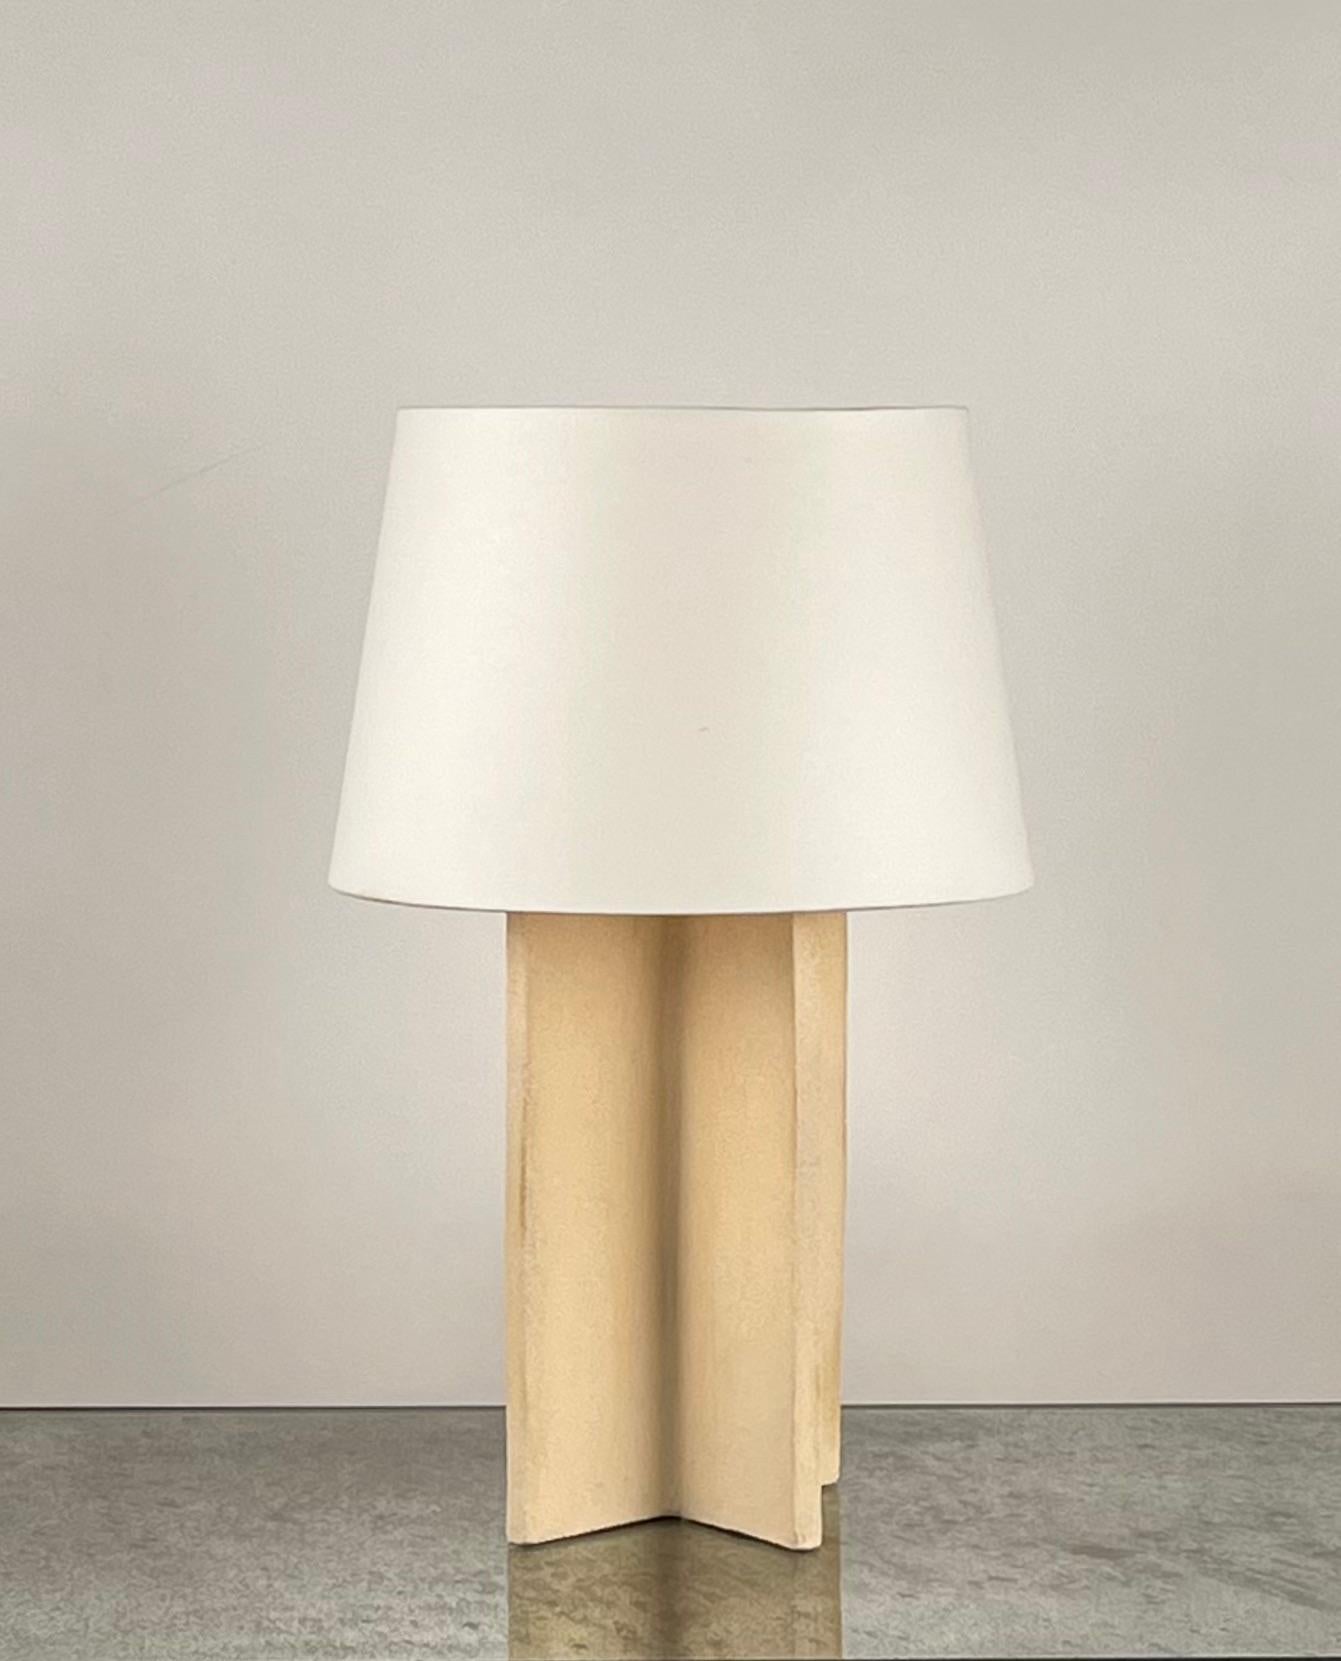 Chic 'Croisillon' cream ceramic lamp with parchment shade by Design Frères.

An attractive, understated combination of a ceramic crosspiece base with a cream matte glaze and a European style parchment shade (no harp or finial).

Dimensions listed